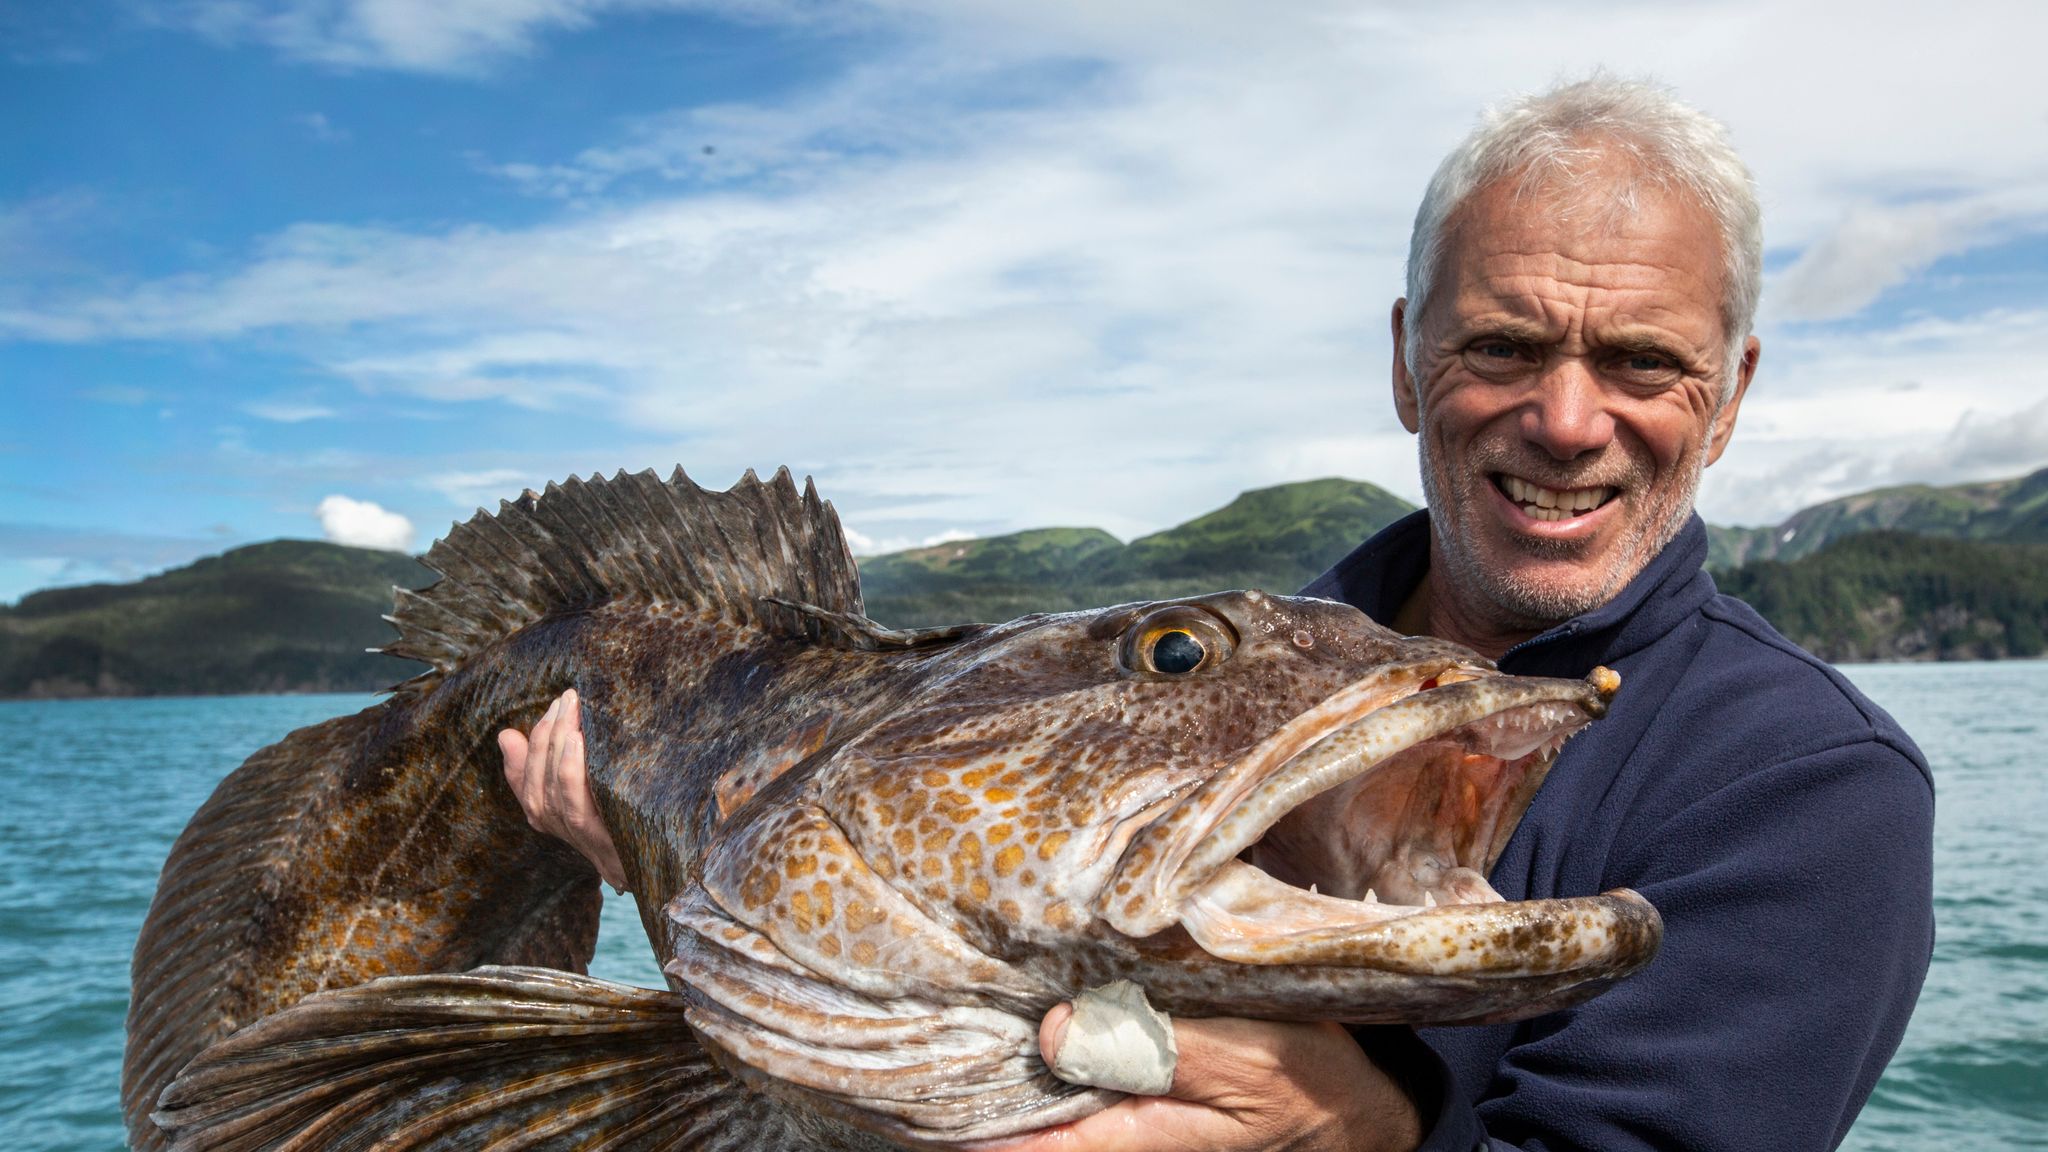 River Monsters to Dark Waters How Jeremy Wade's extreme fishing got